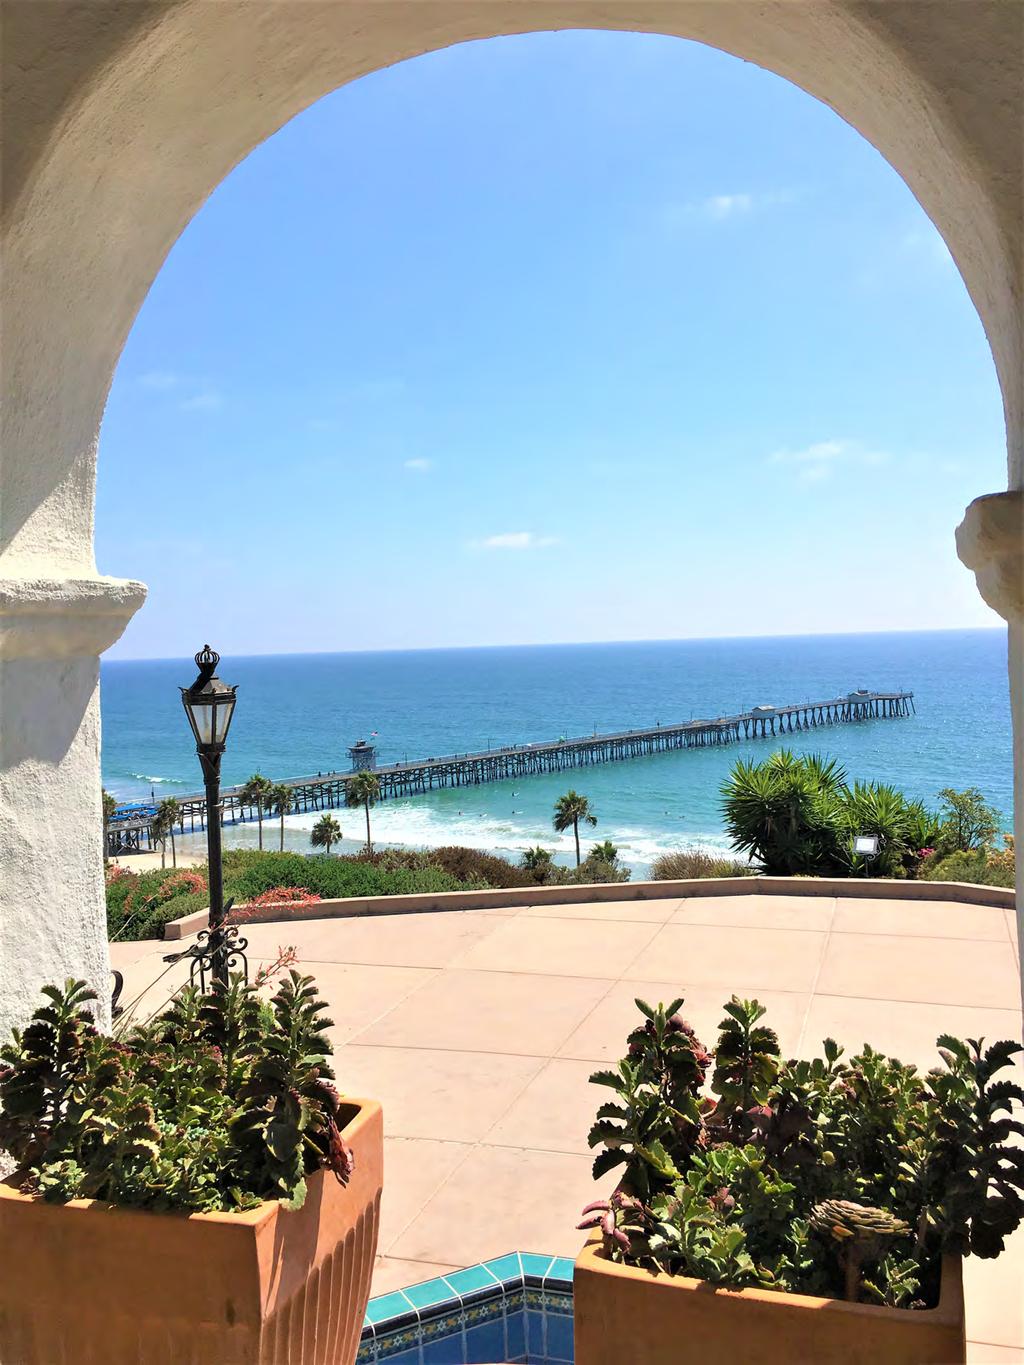 pleasant climate and its Spanish Colonial style architecture. San Clemente's city slogan is "Spanish Village by the Sea".